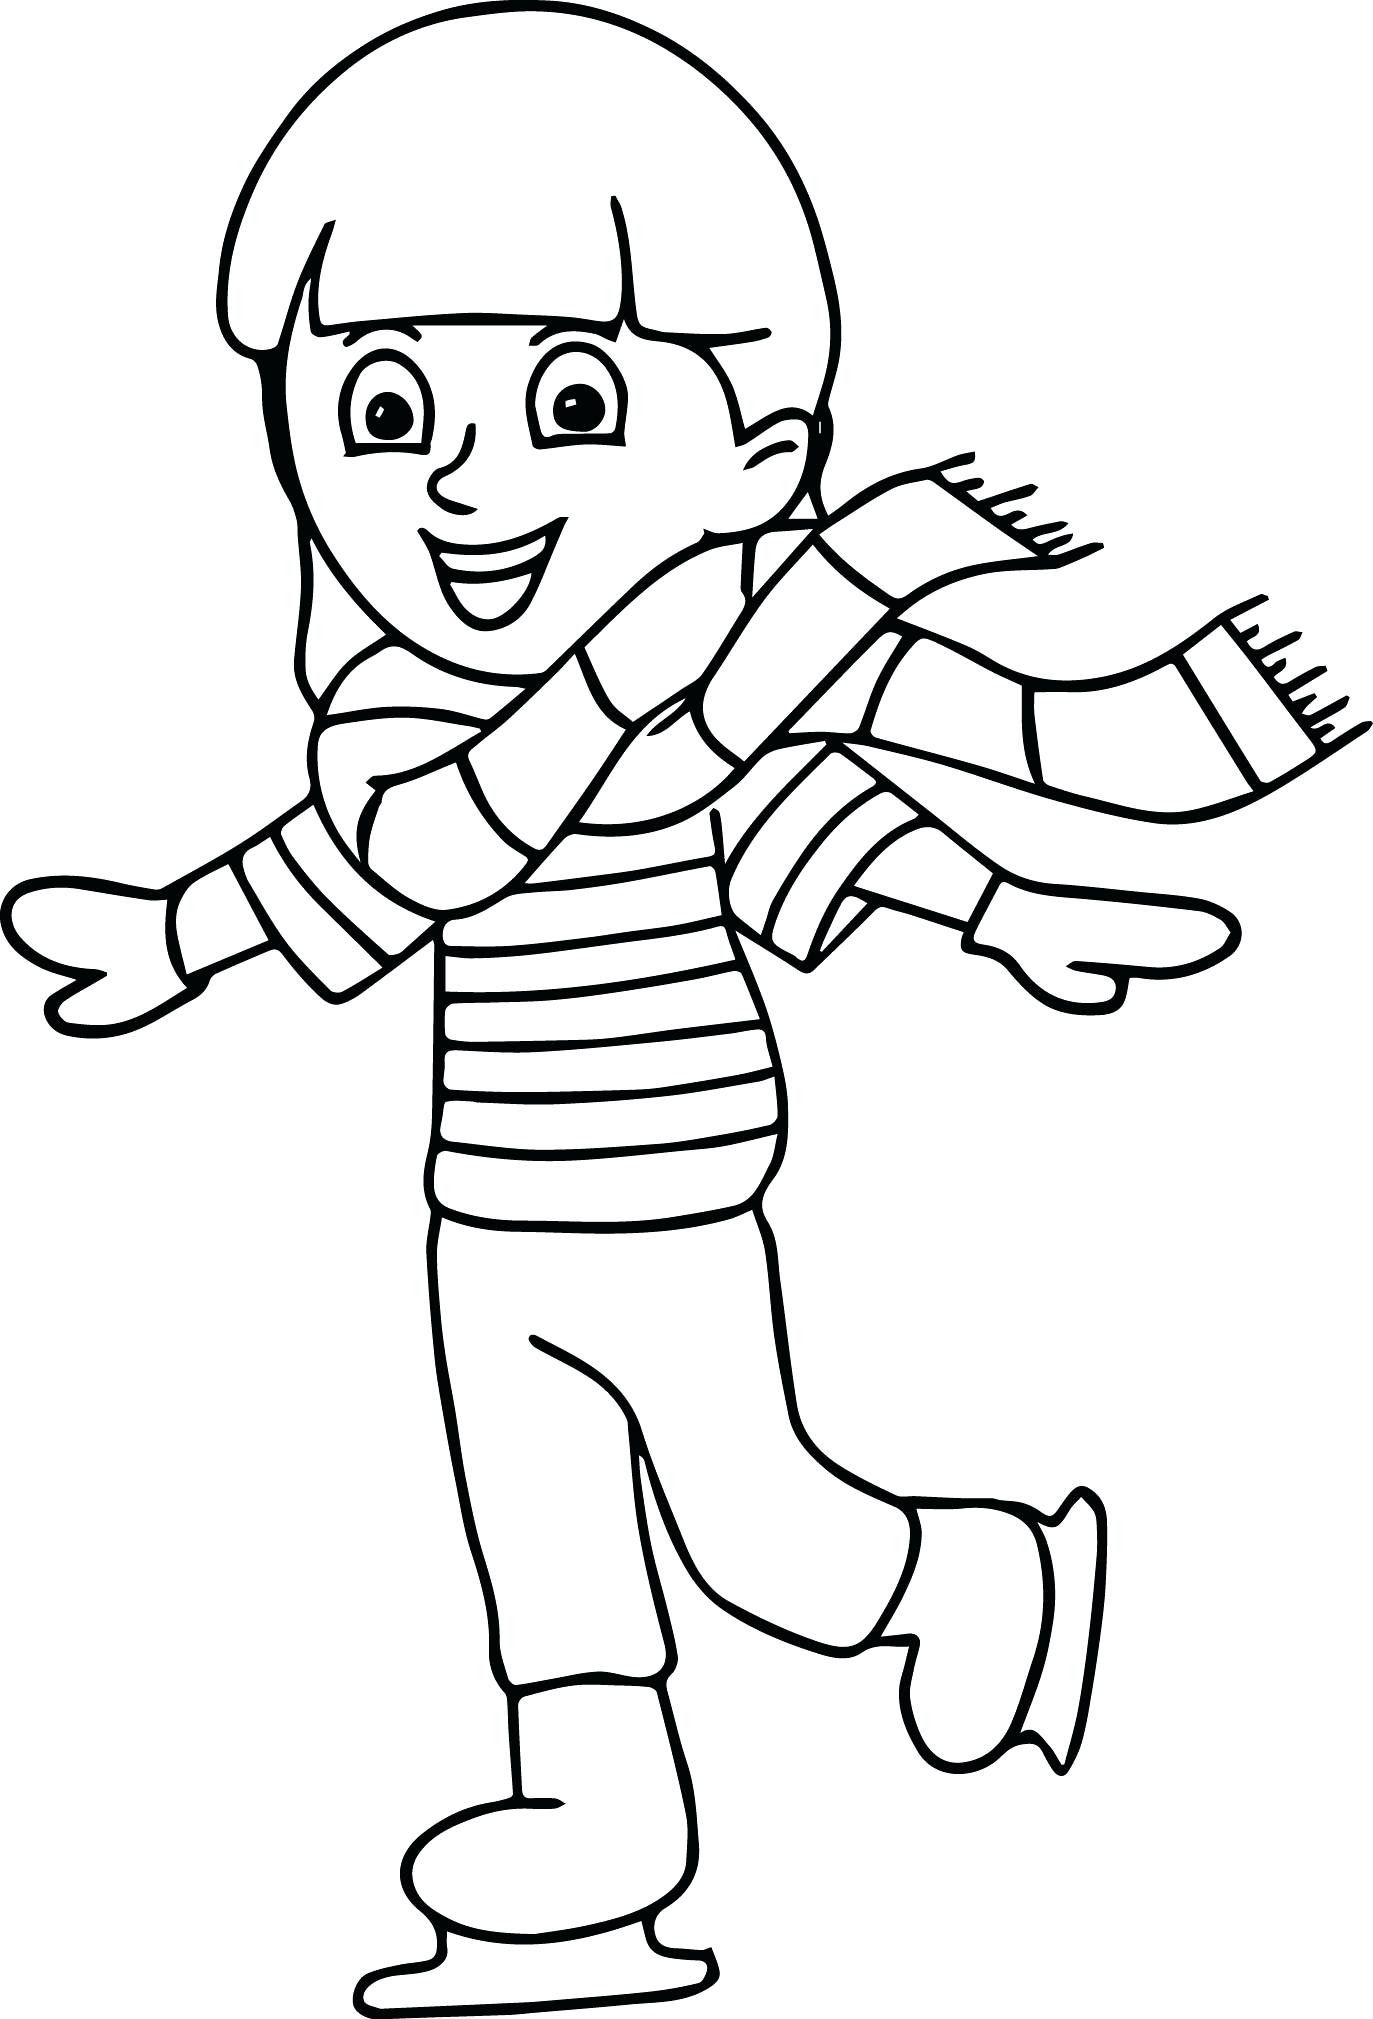 Coloring Pages Ice Skating At Getcolorings.com | Free Printable